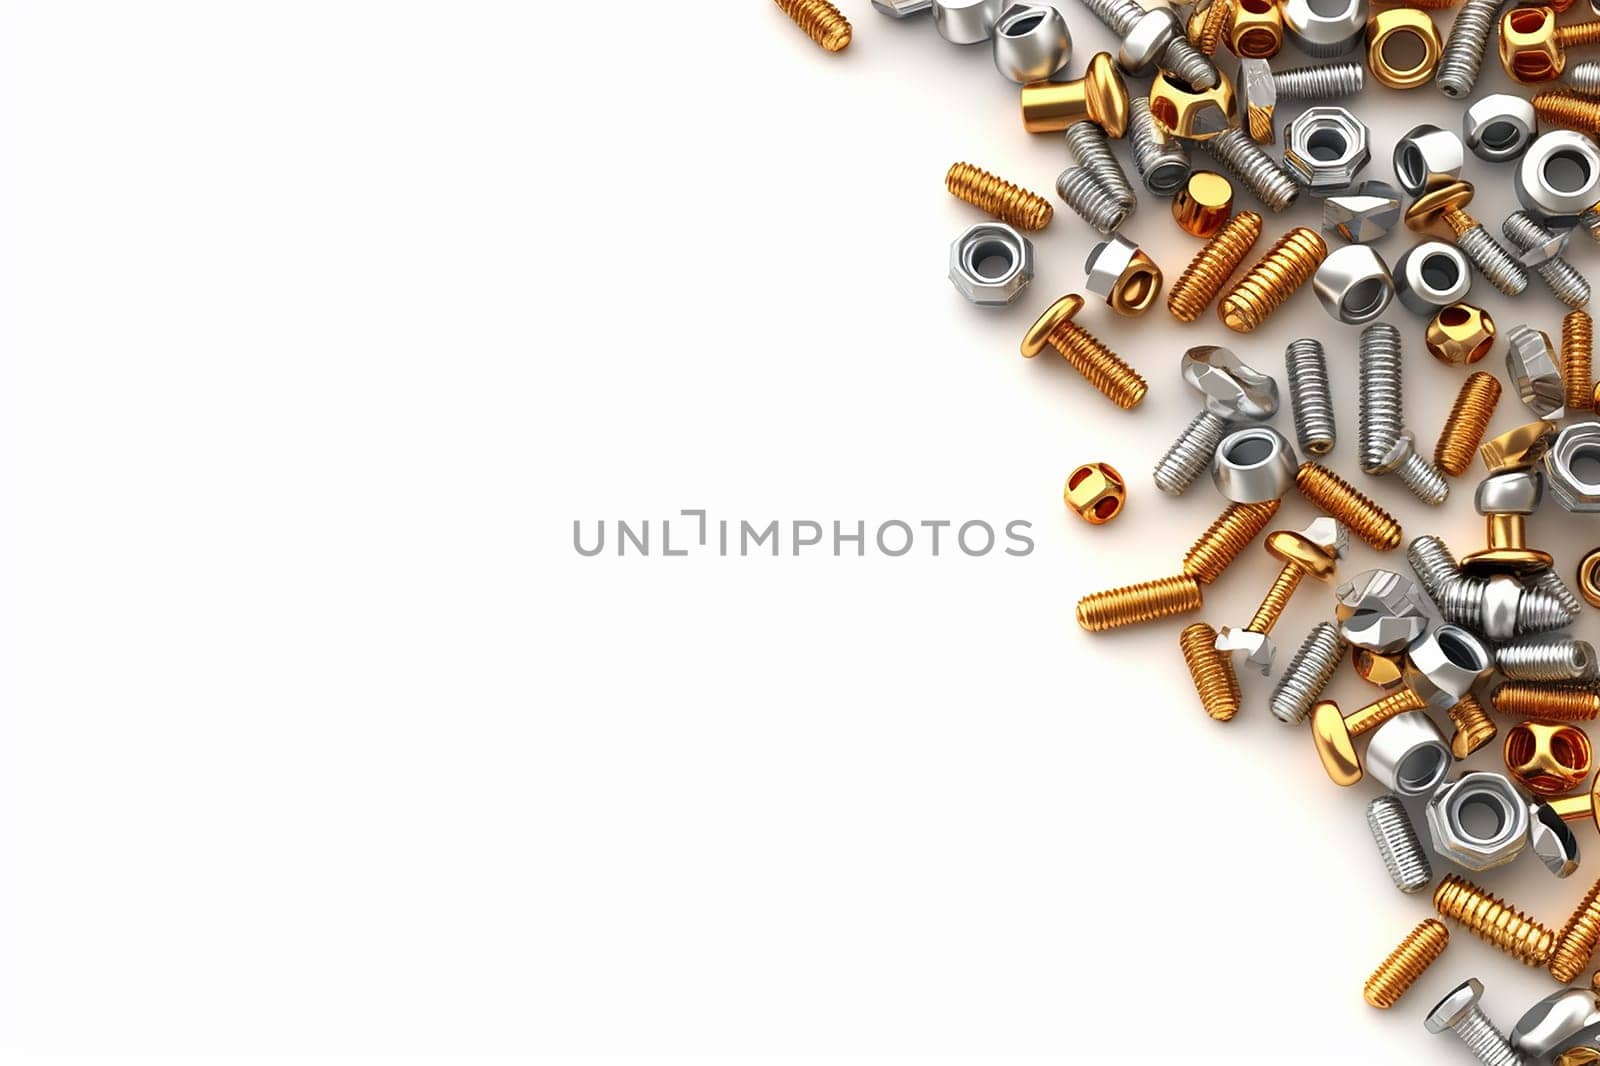 Assorted screws, bolts, and nuts spread diagonally on a white background.